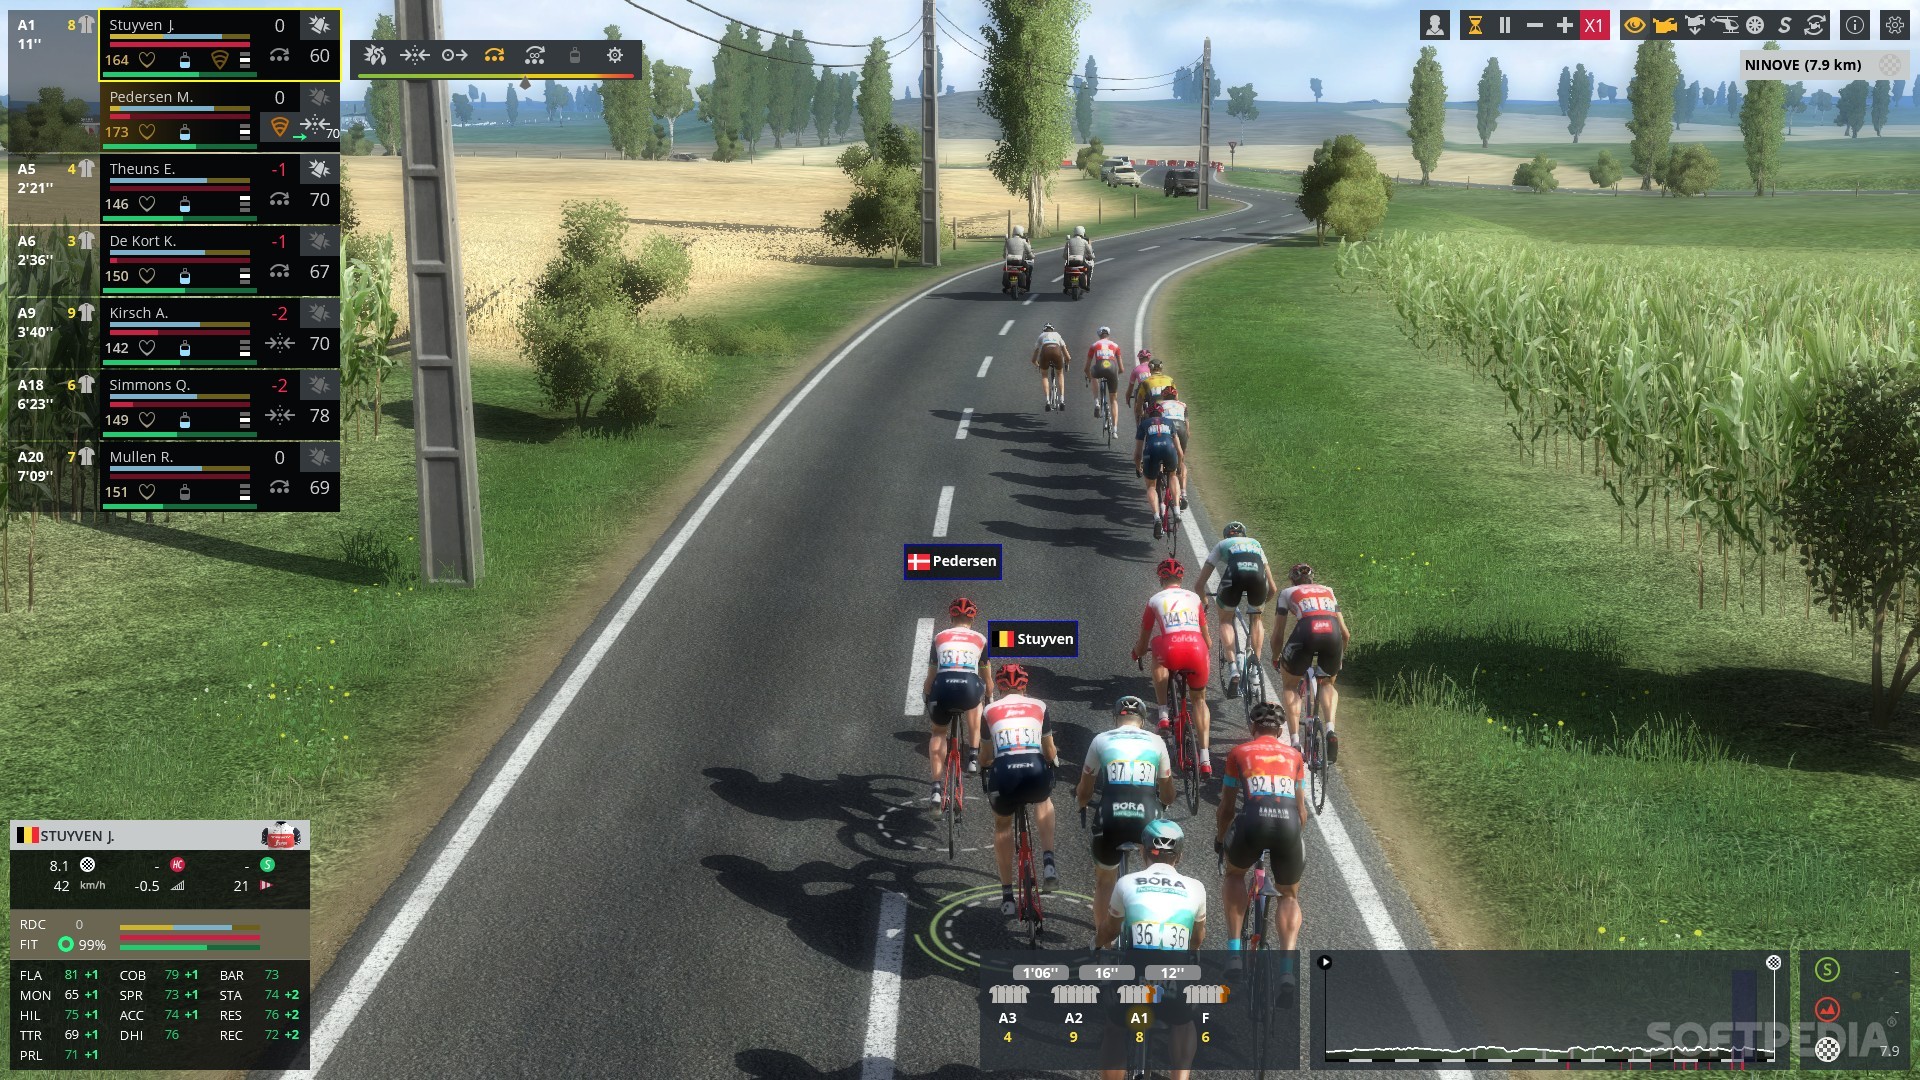 Pro Cycling Manager 2021 - First Impressions & New Features / Echelons,  Time Trial & Career / PCM21 